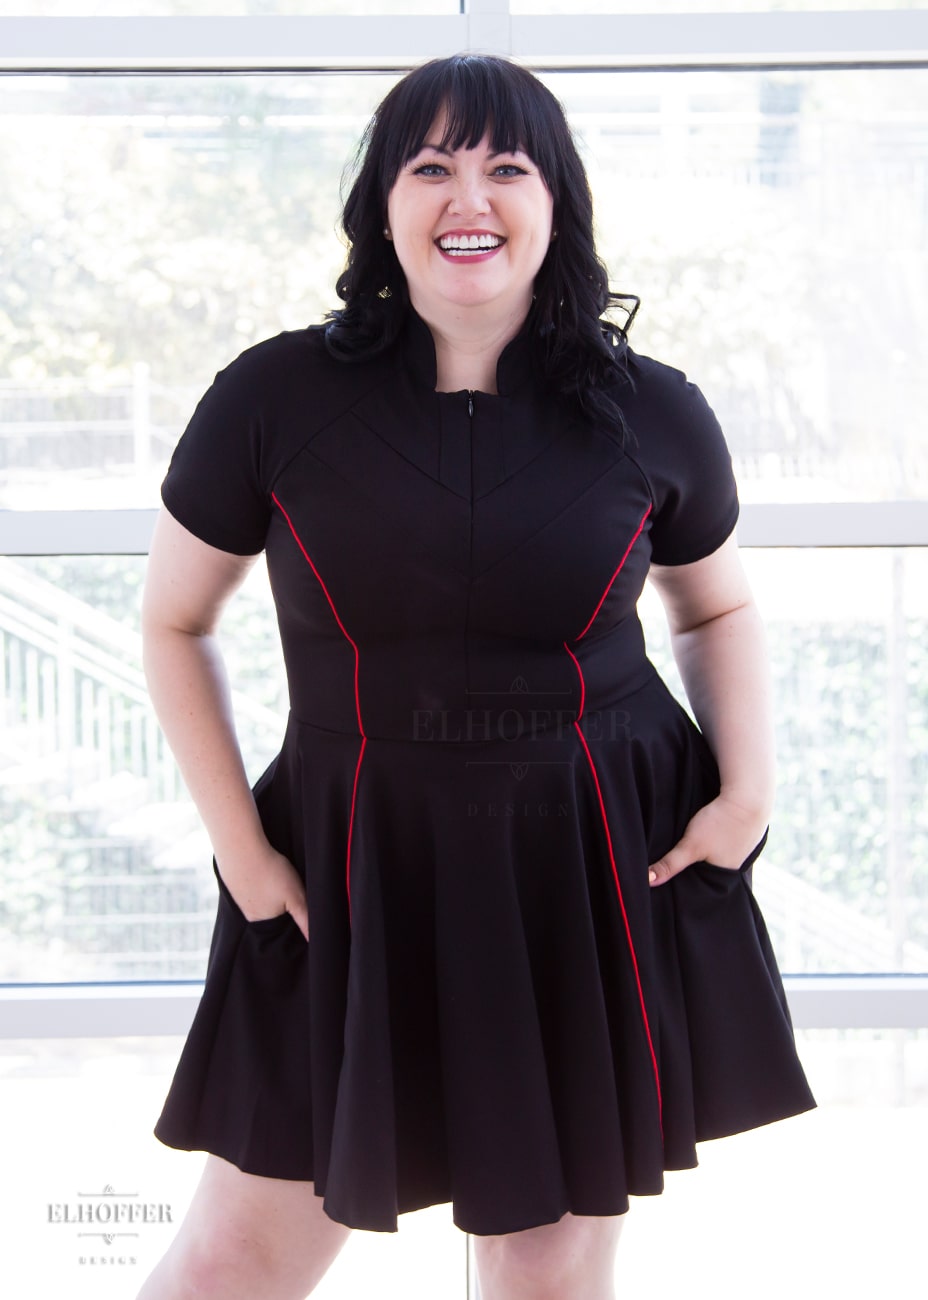 Bernadette, a fair skinned size large model with black hair and bangs, is wearing short raglan sleeved dress with a high neck, invisible front zipper, and princess seams on the front and back as well as pockets. The dress is black with red piping details.